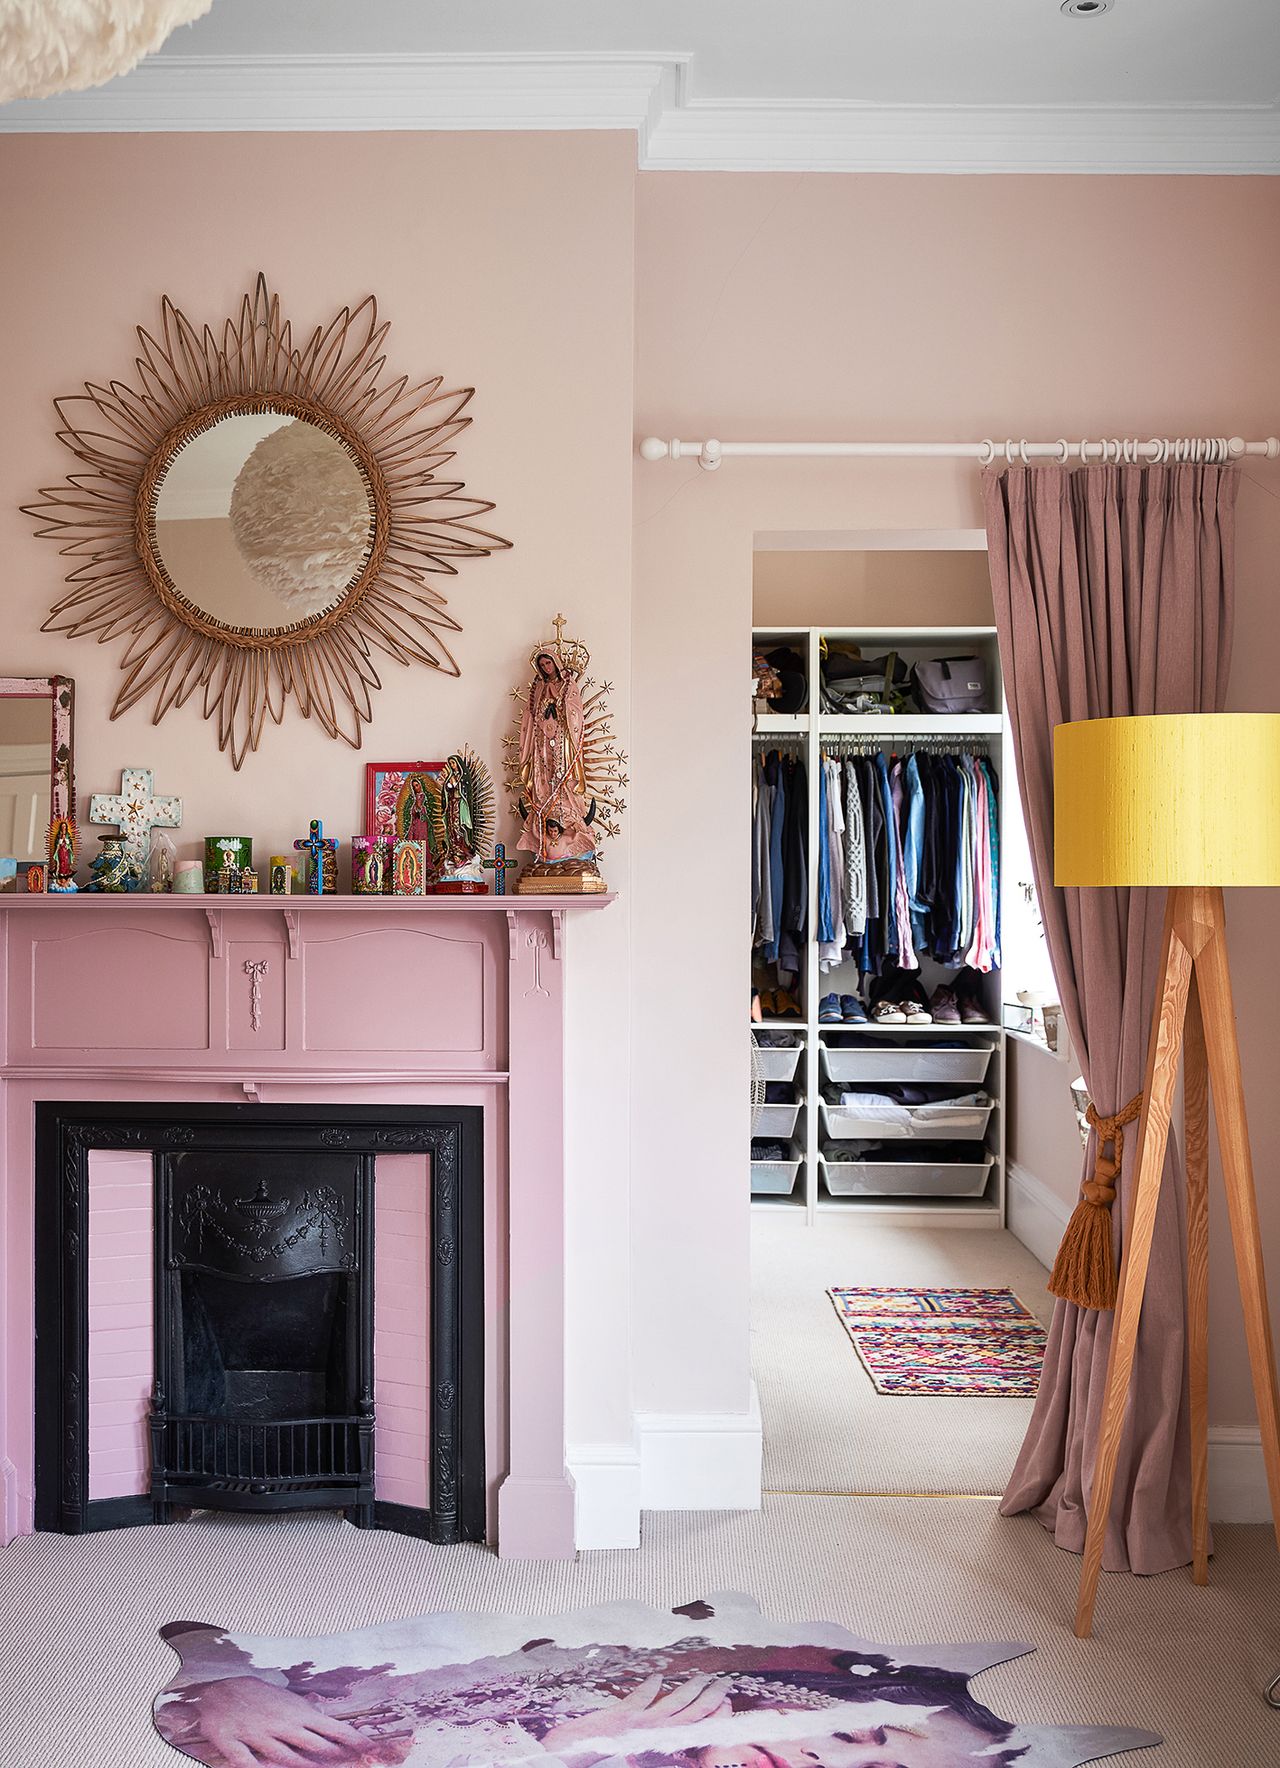 This detached Victorian house in London boasts more than a splash of ...